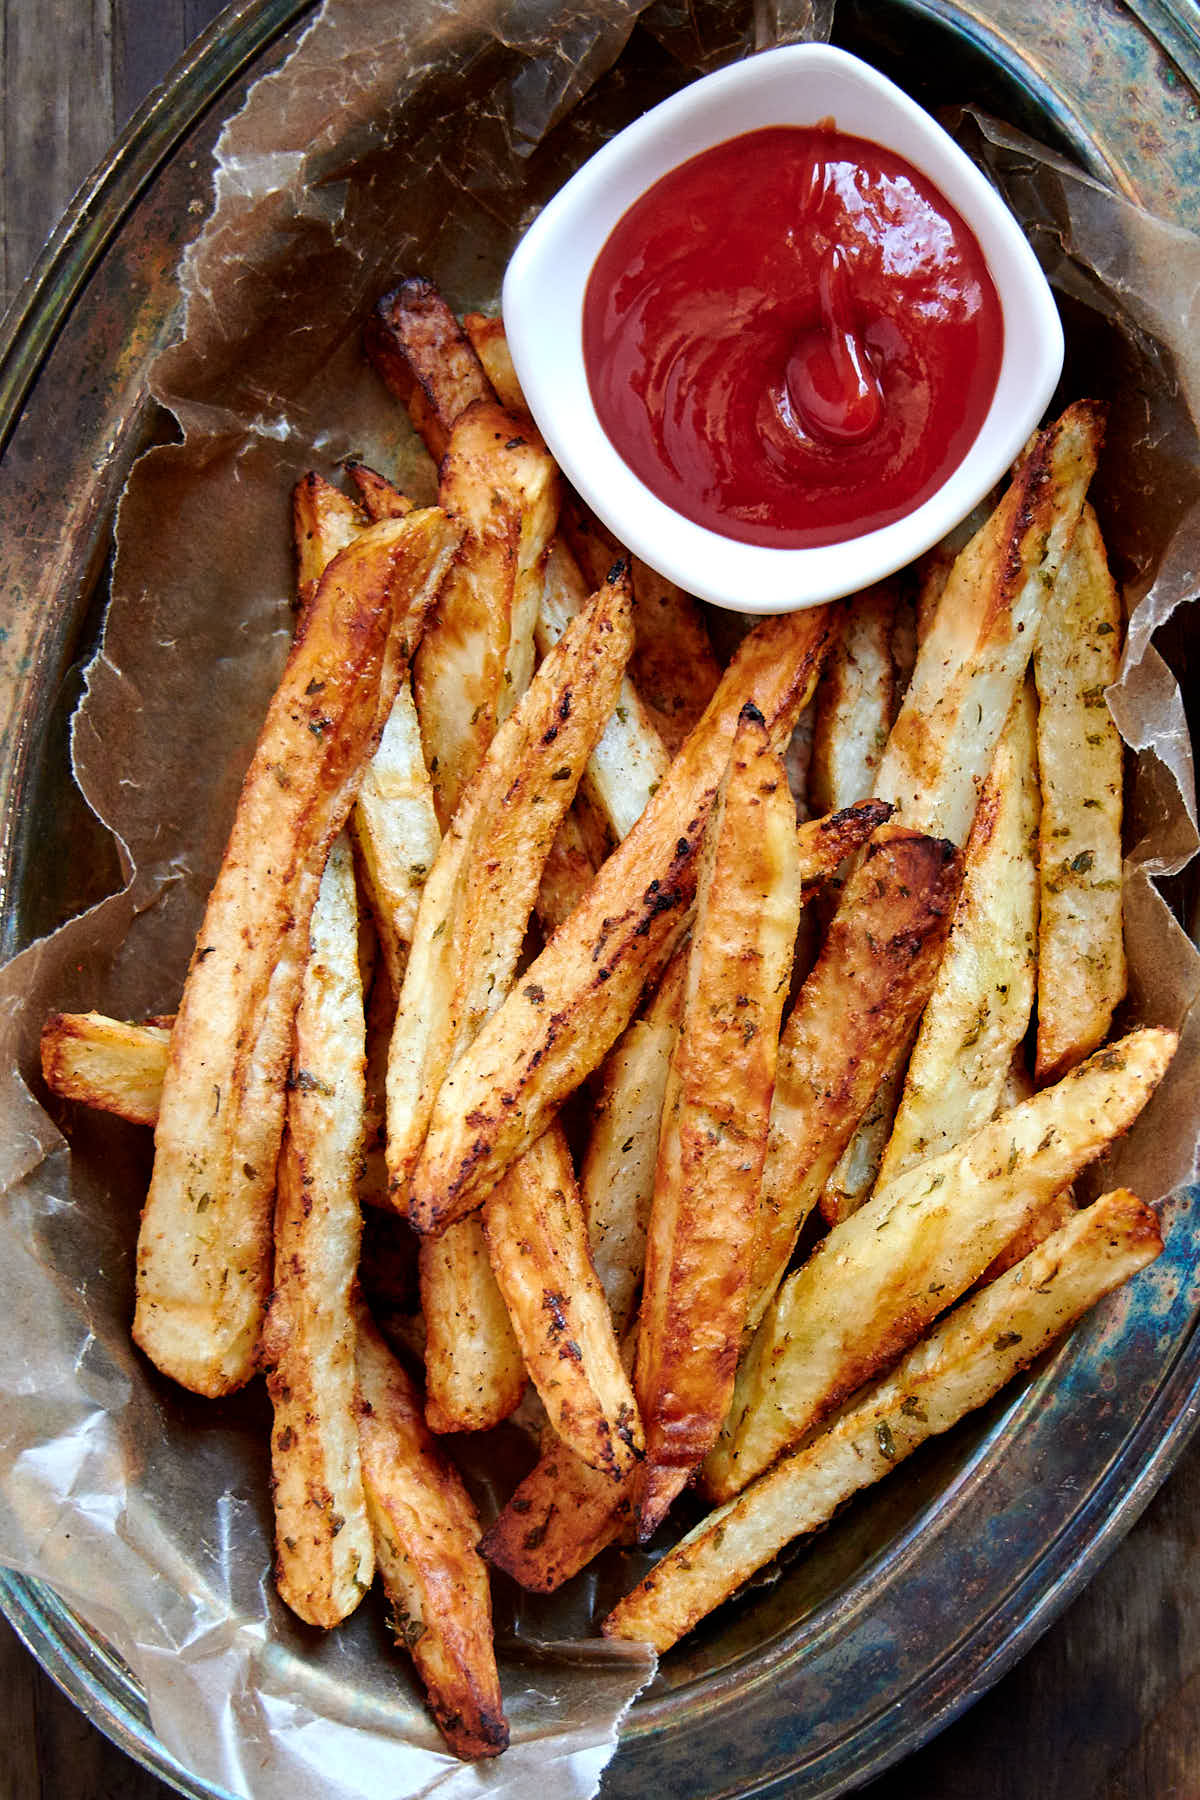 Close up of crunchy golden brown French fries in a serving basket with ketchup on the side.